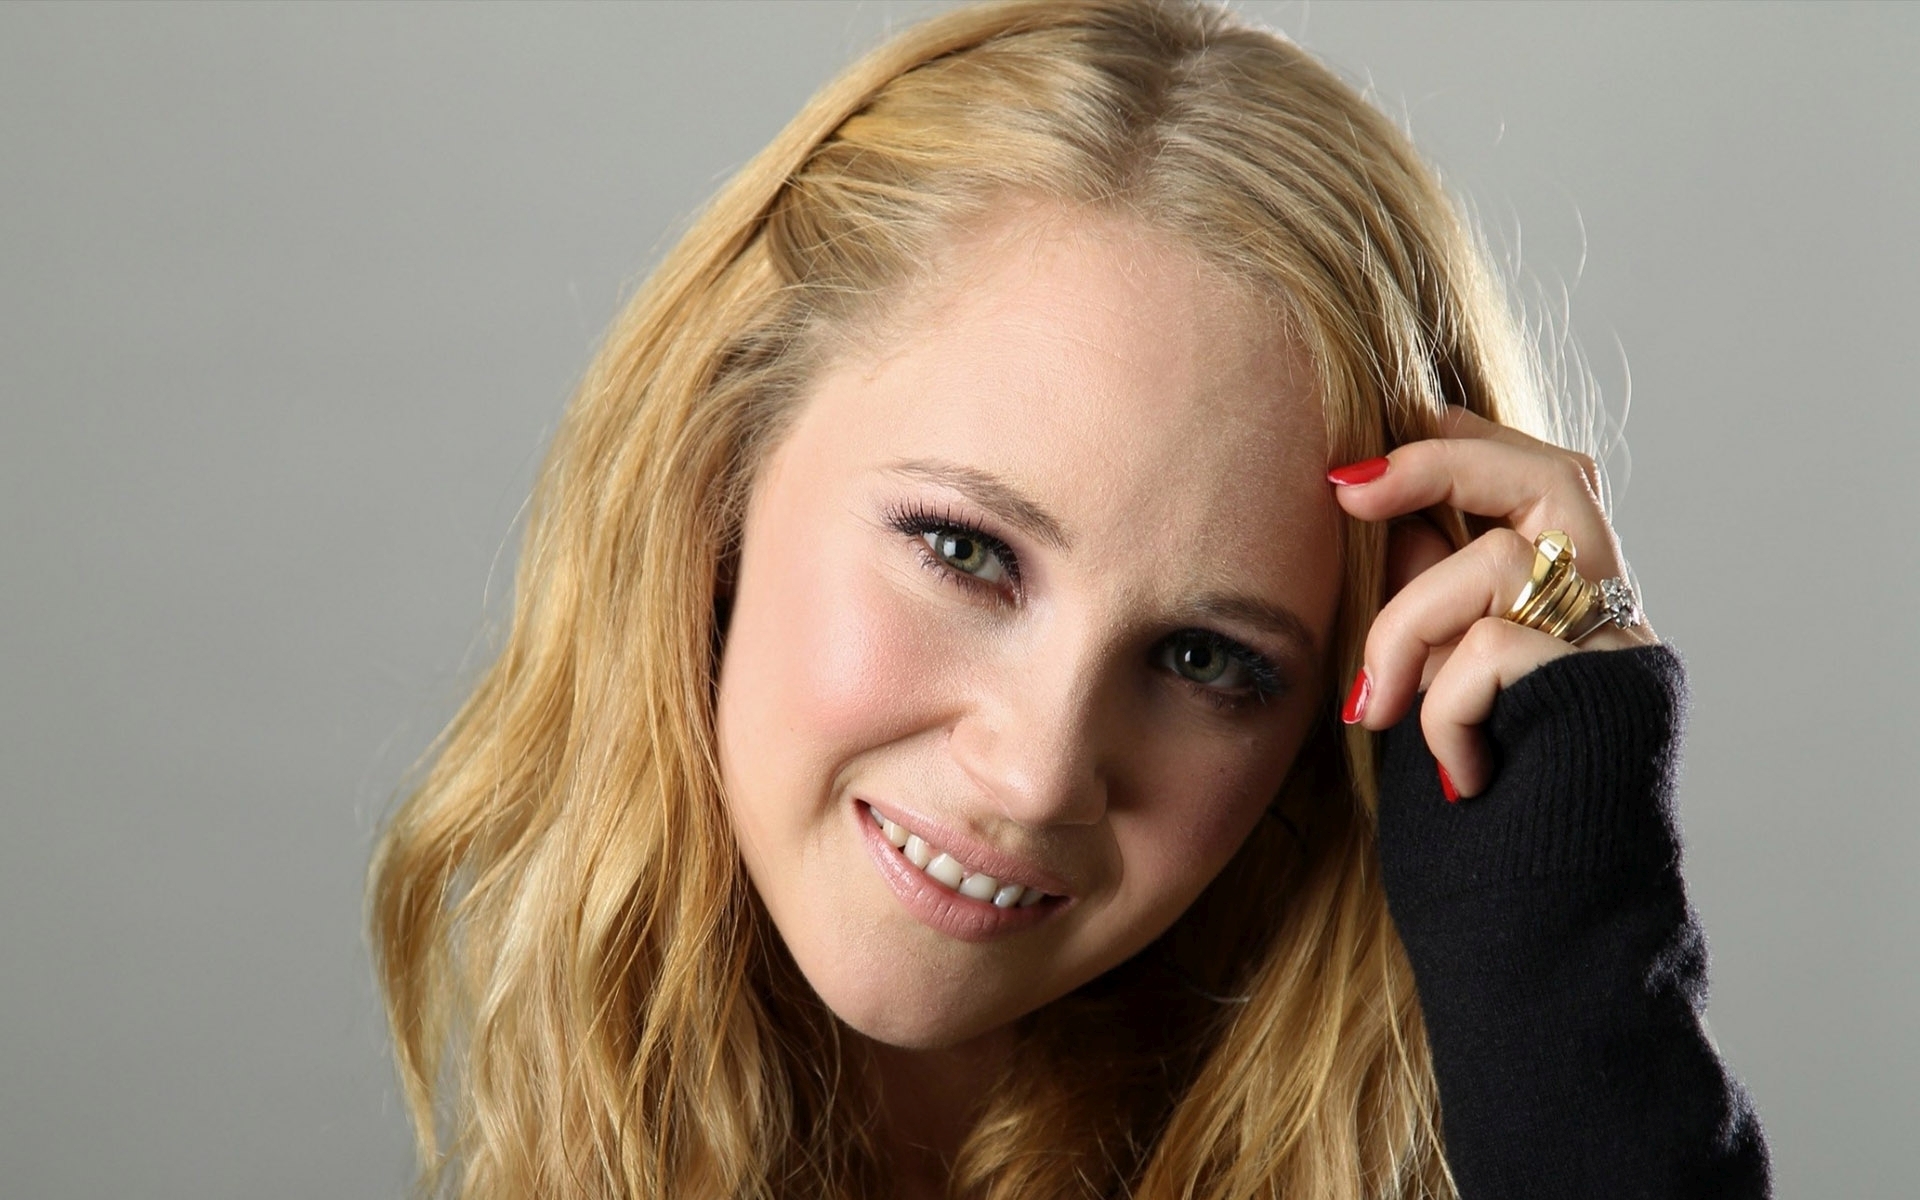 celebrity, juno temple, actress, blonde, face, green eyes, smile